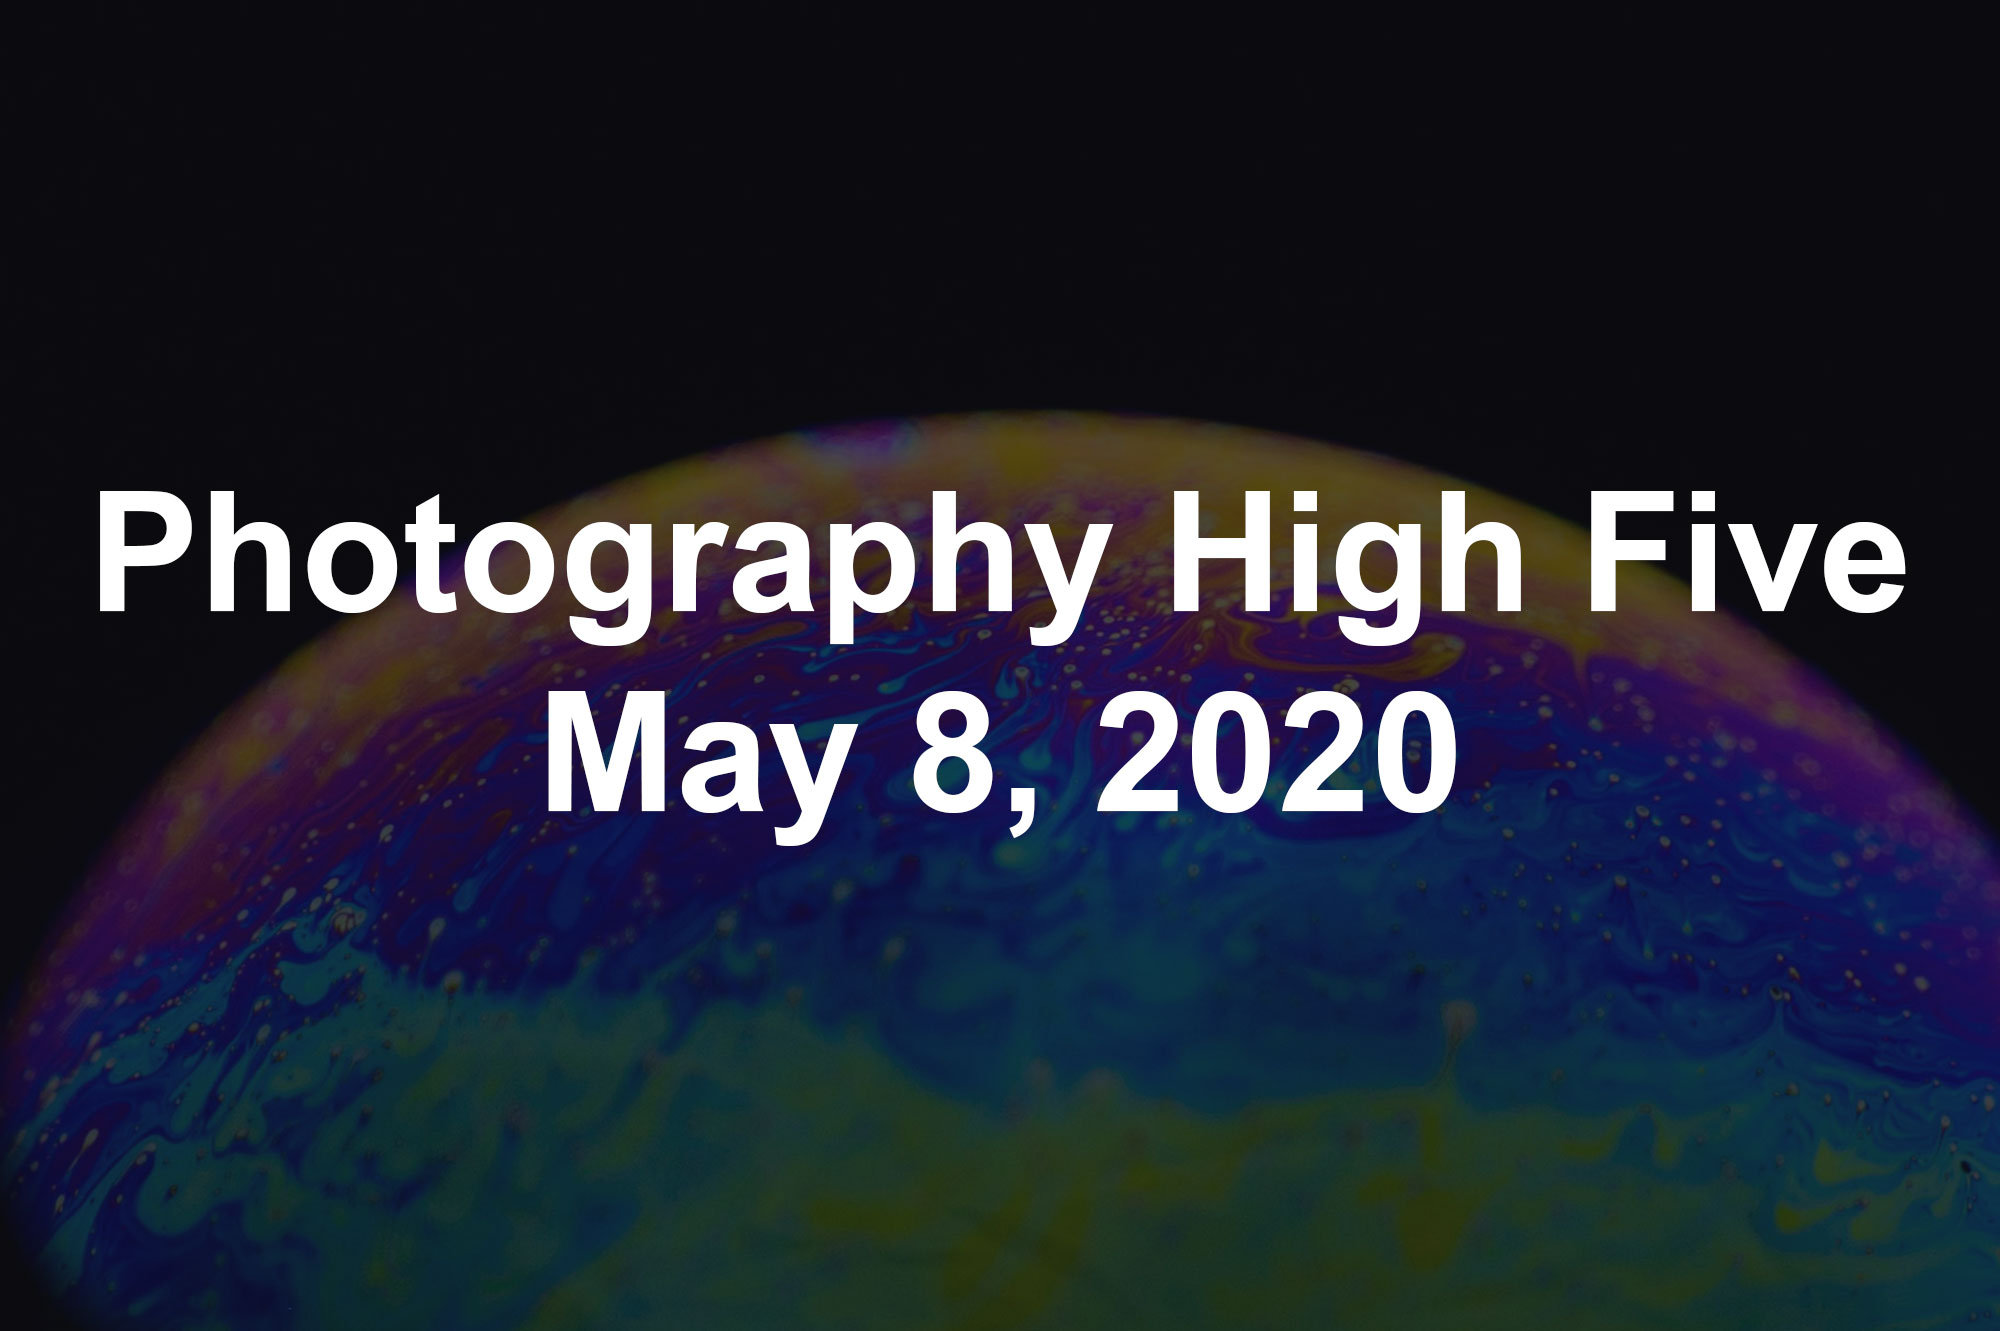 Photography High Five May 8, 2020